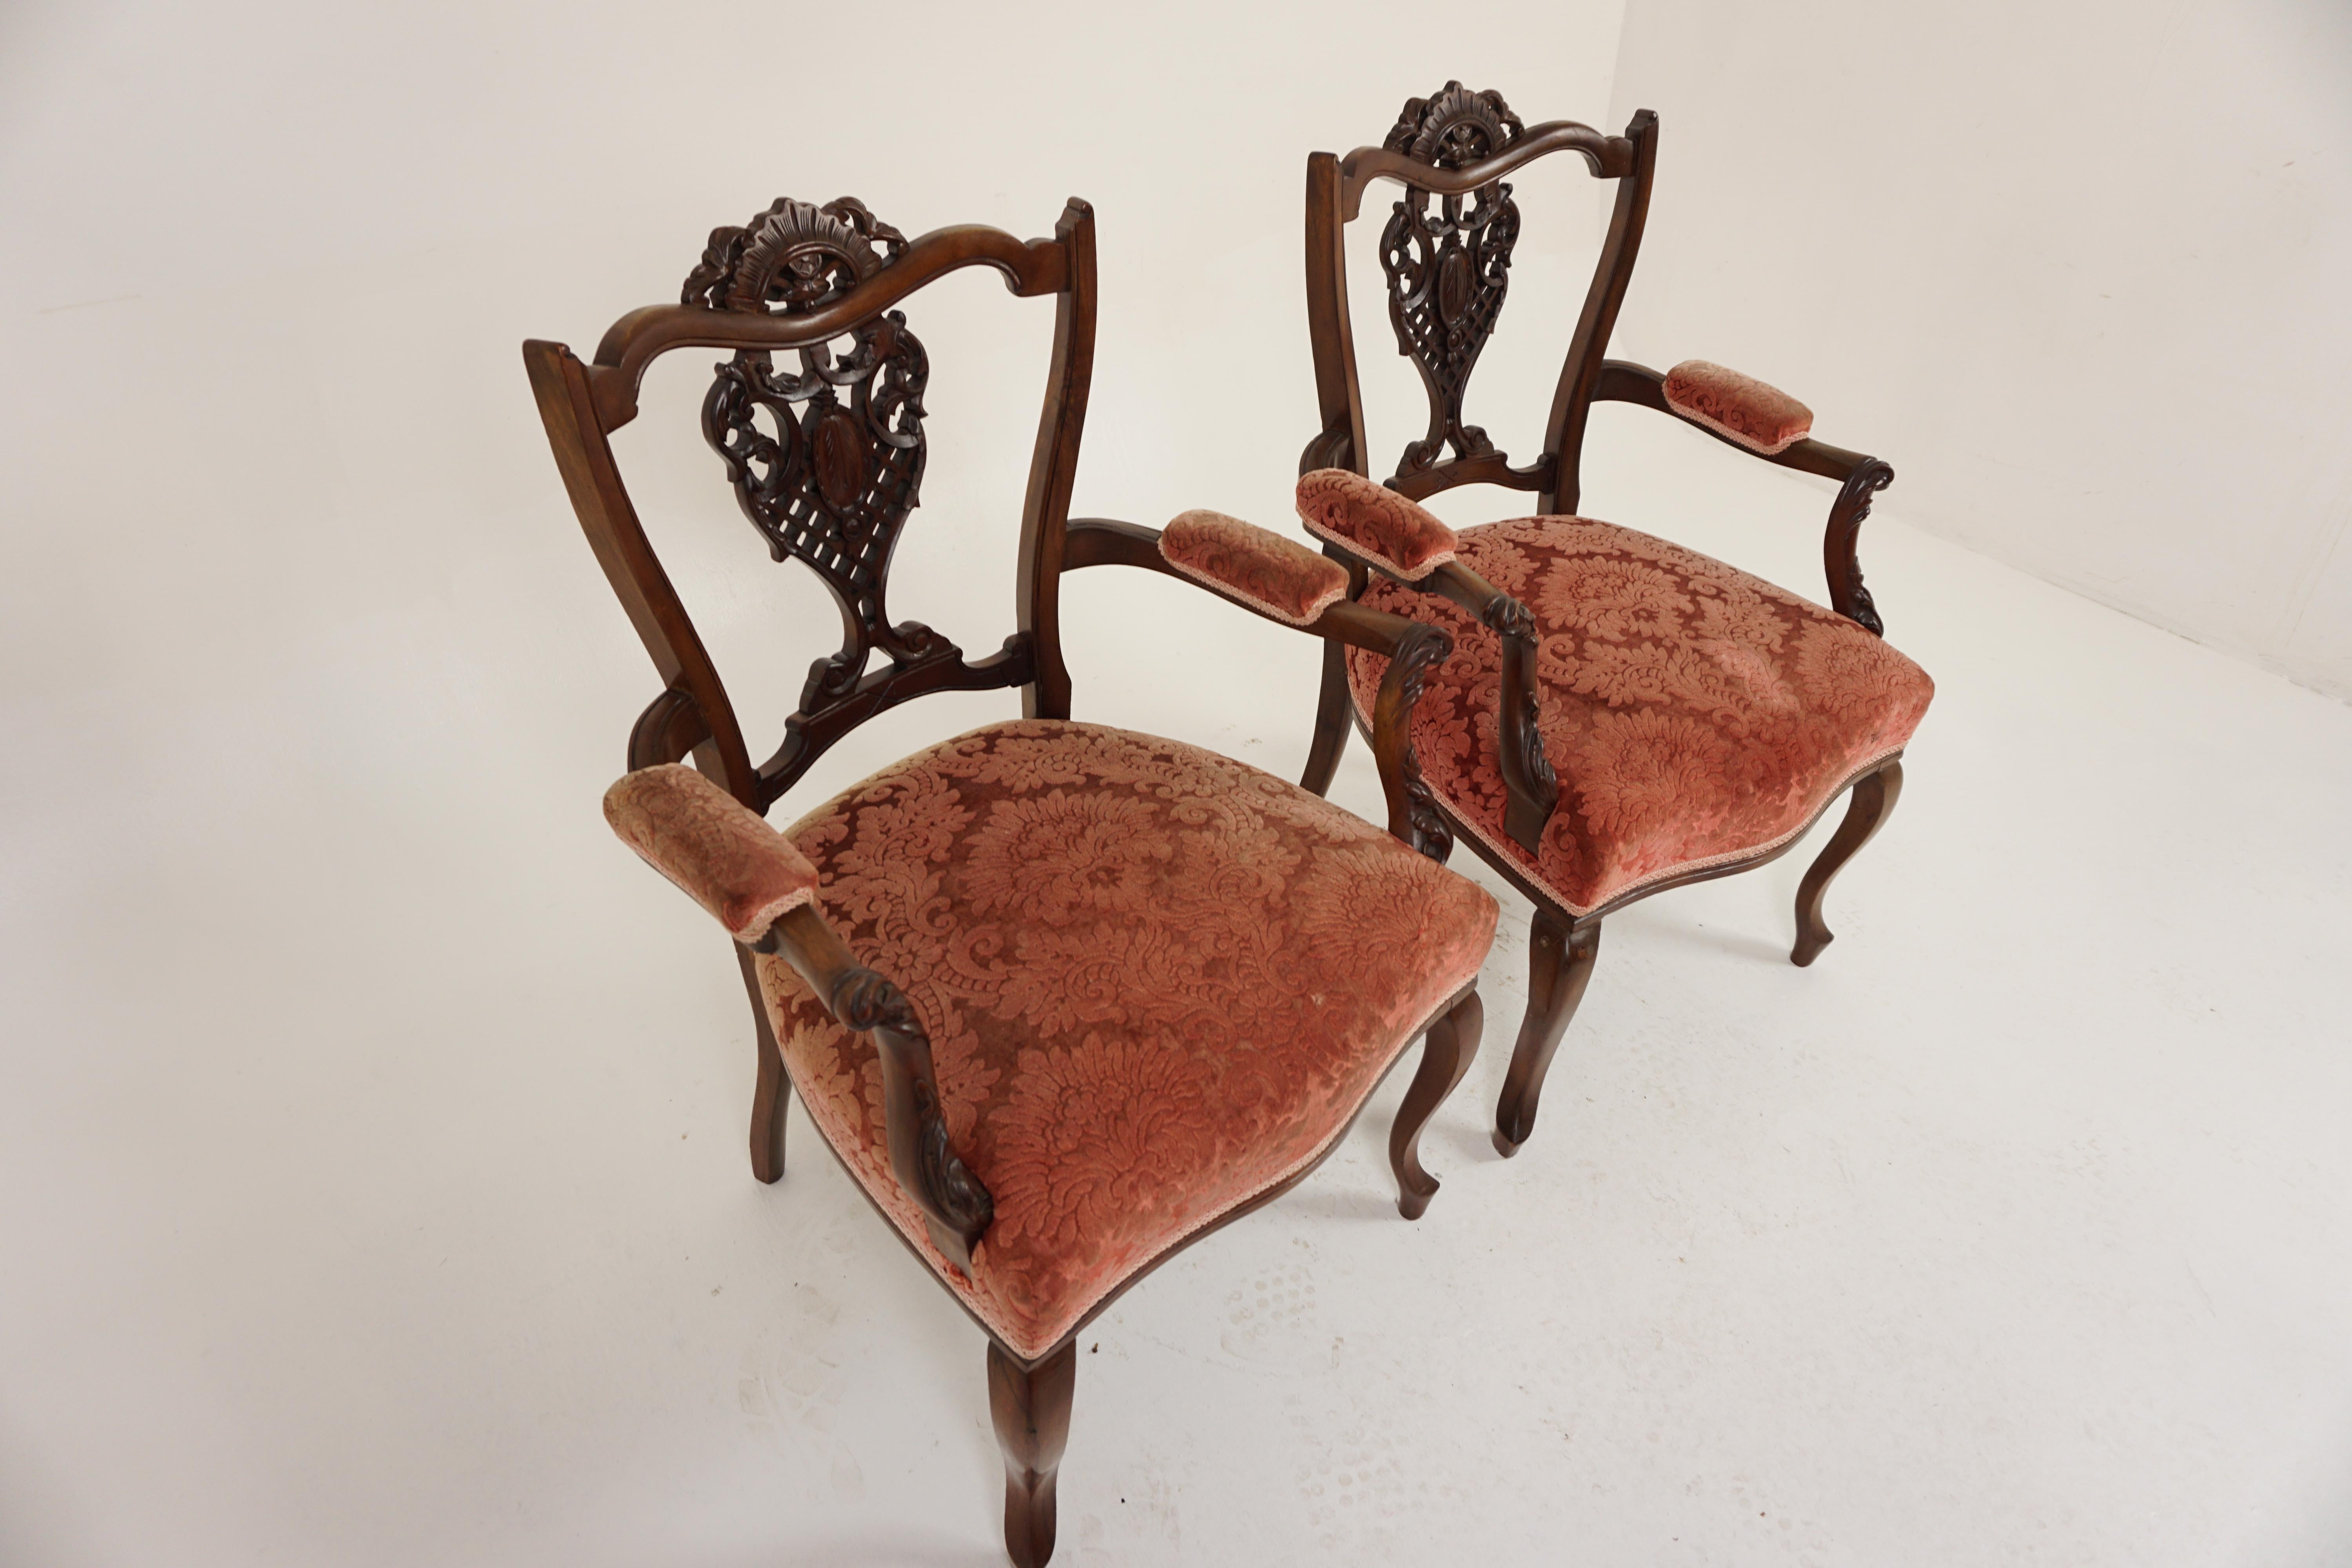 Scottish Antique Walnut Chairs, Pair of Edwardian Carved Arm Chairs, Scotland 1900, H983 For Sale